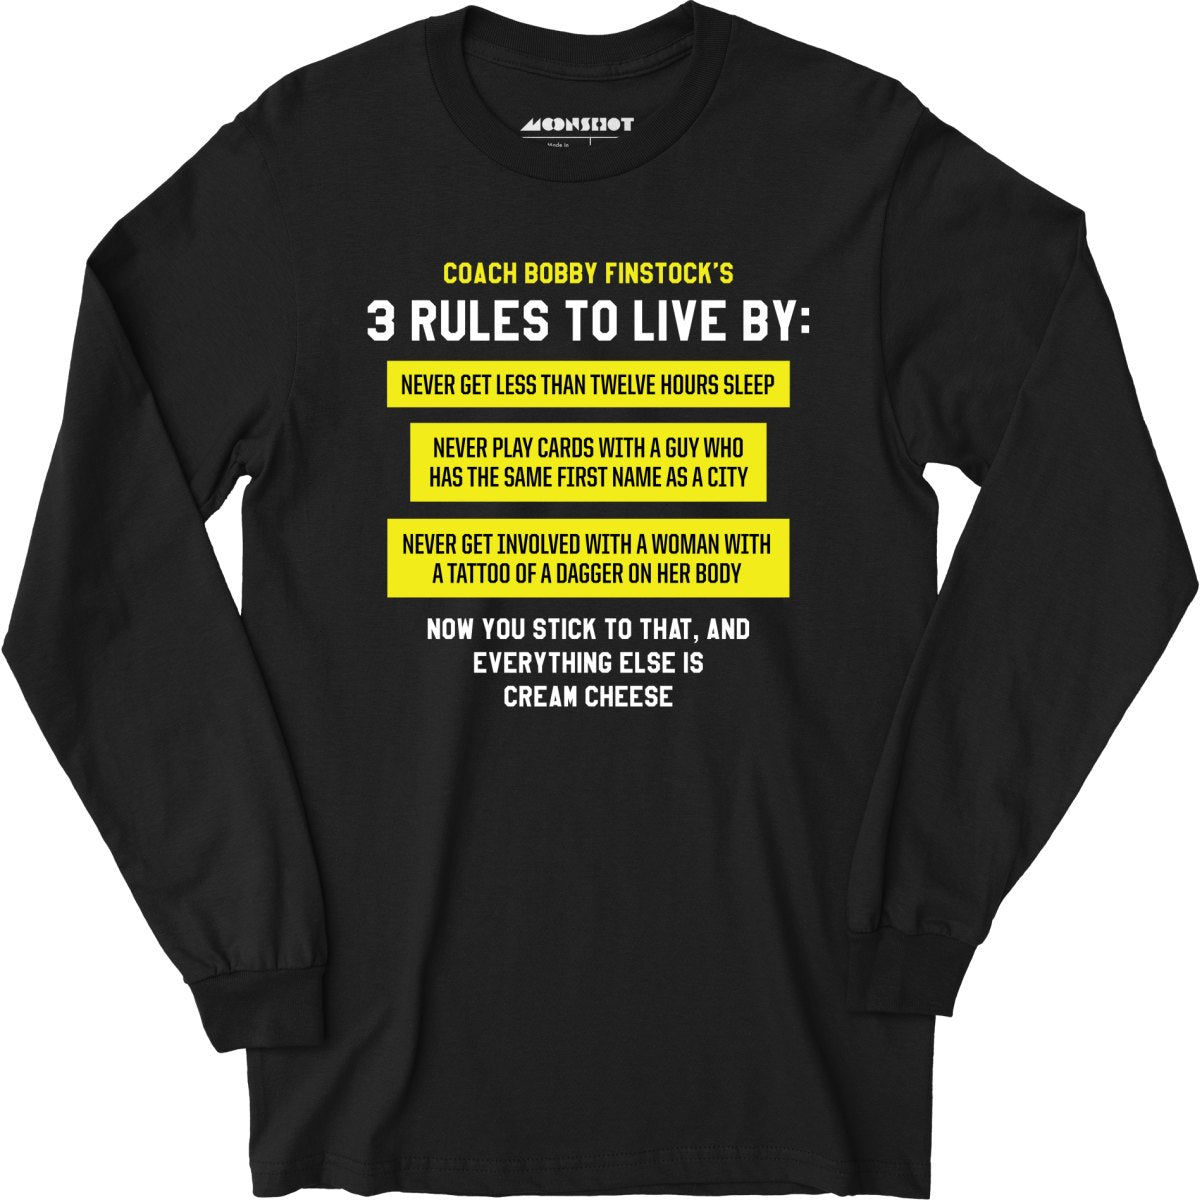 Coach Bobby Finstock's 3 Rules to Live By - Long Sleeve T-Shirt